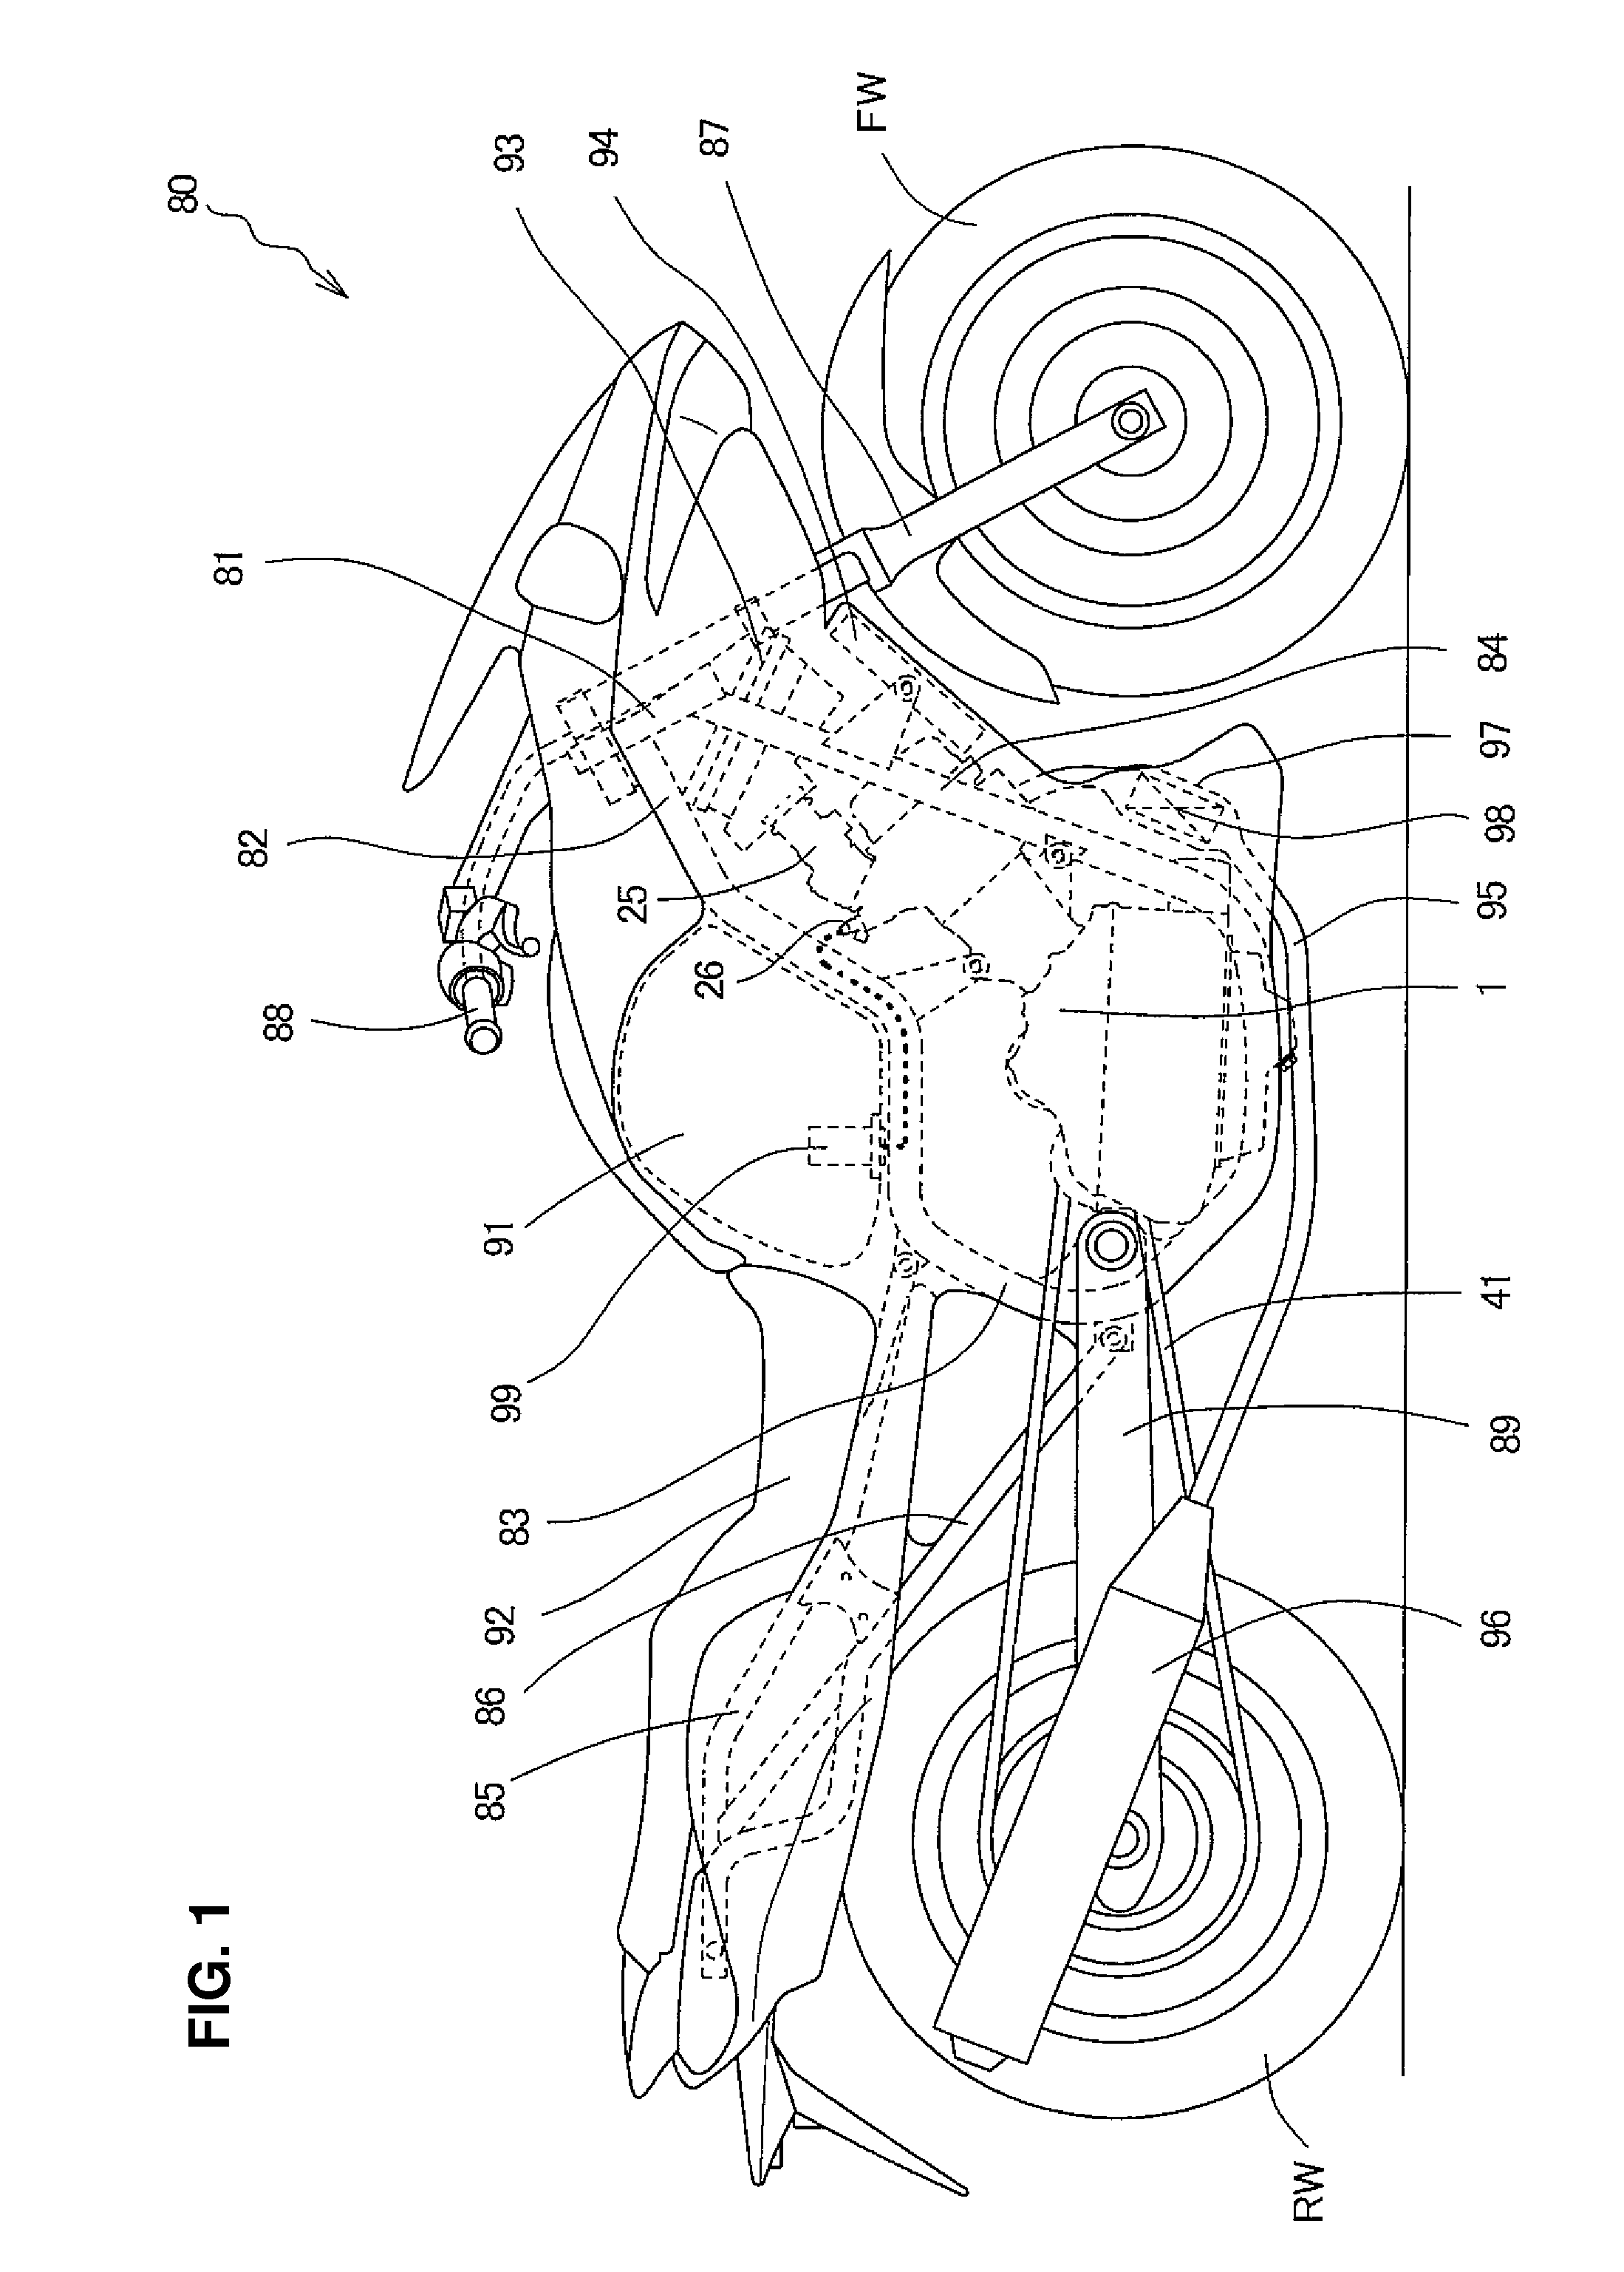 Oil storage structure for engine, engine incorporating same, and vehicle incorporating same